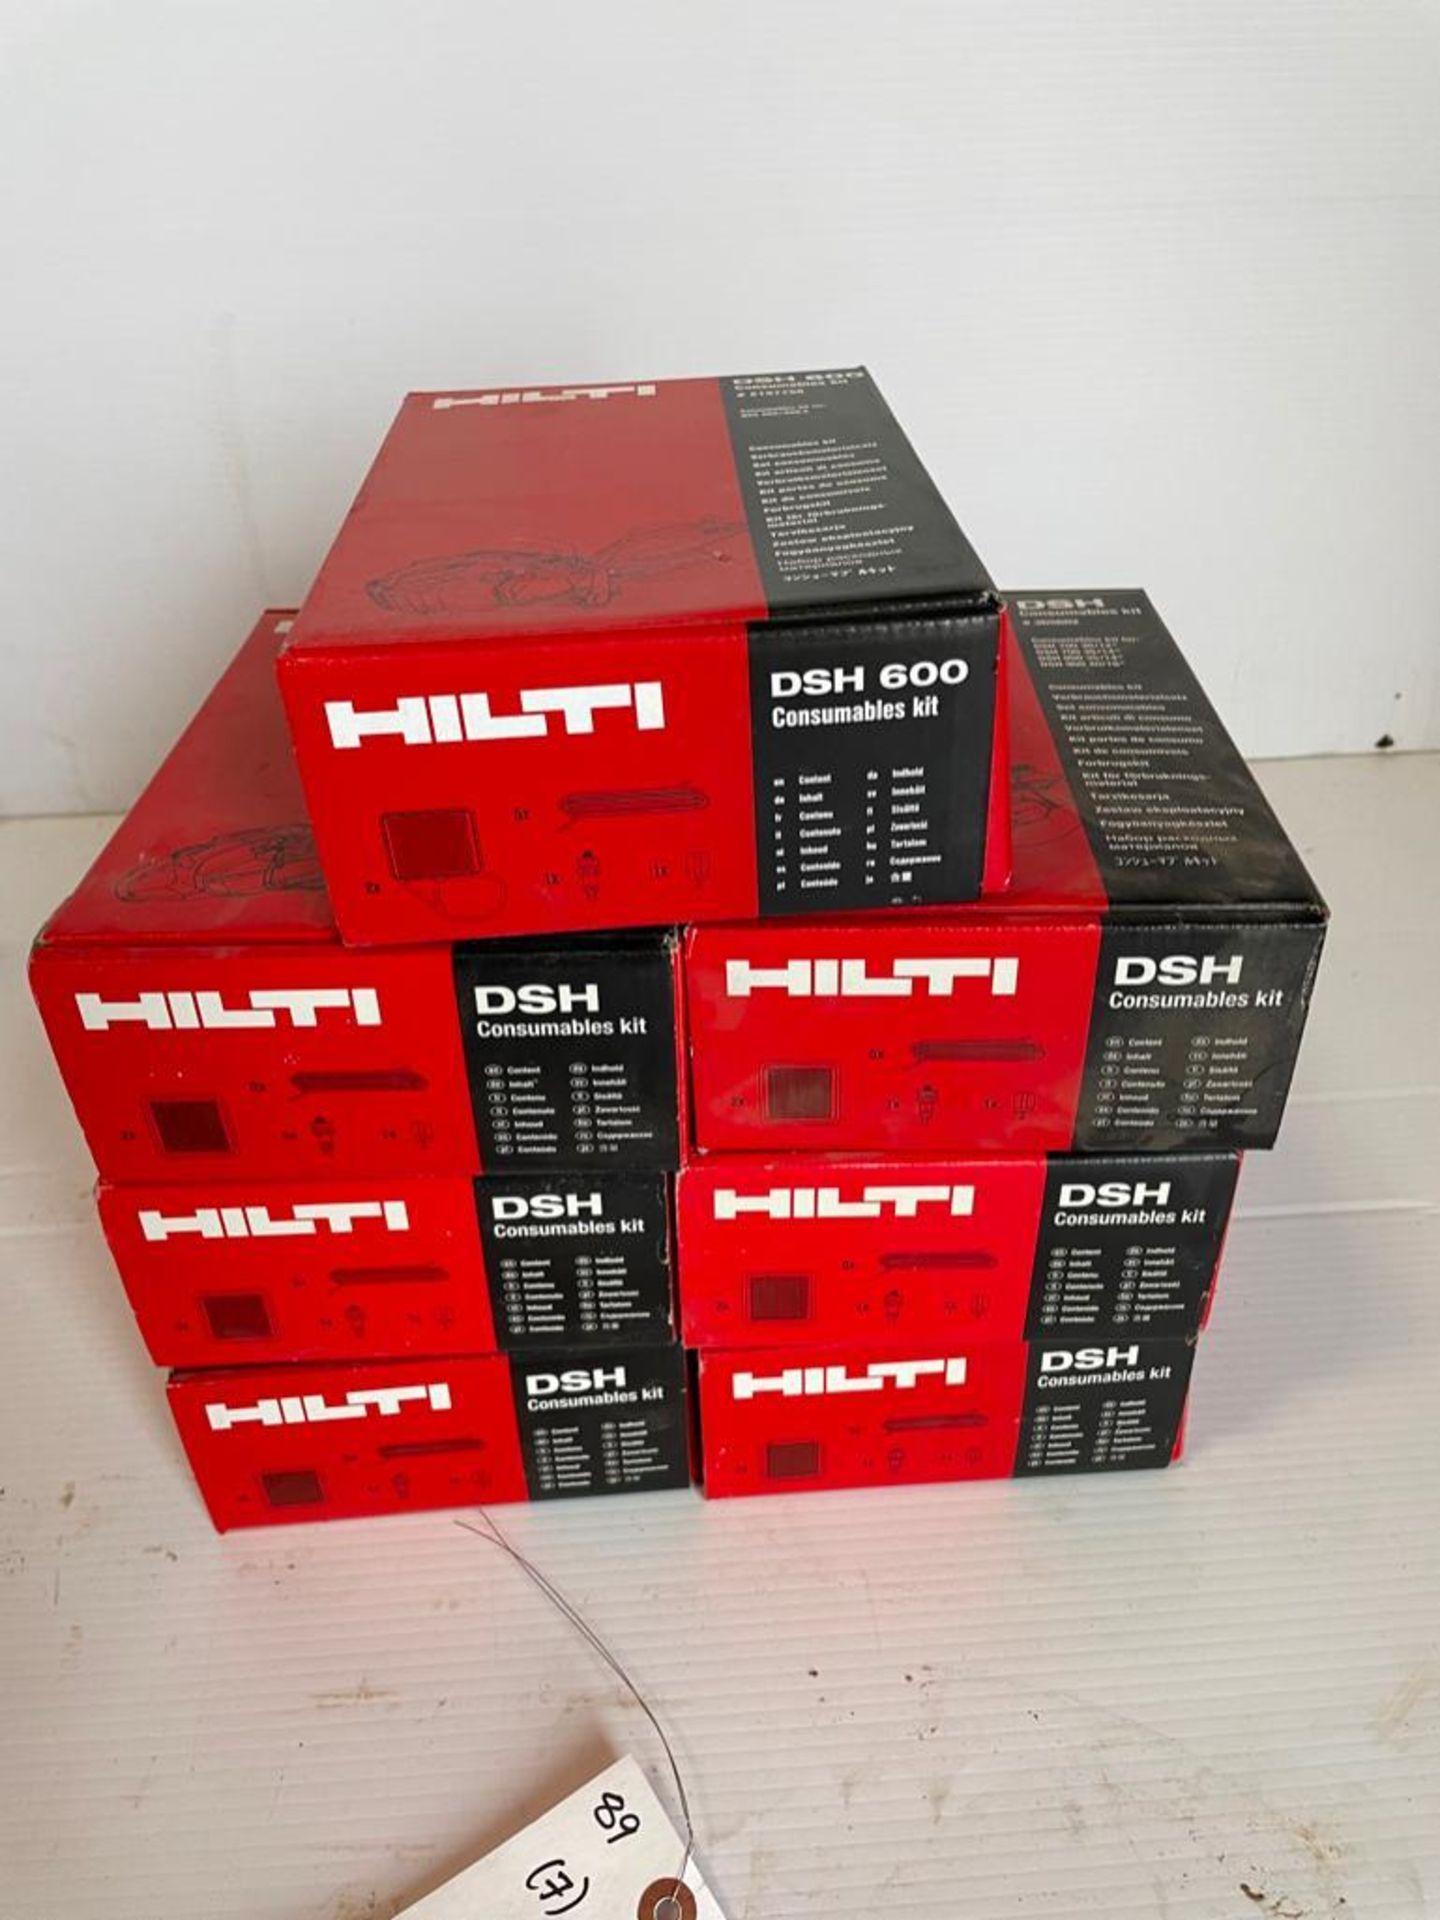 Hilti DSH Consumables Kit. Located in Hazelwood, MO - Image 3 of 5